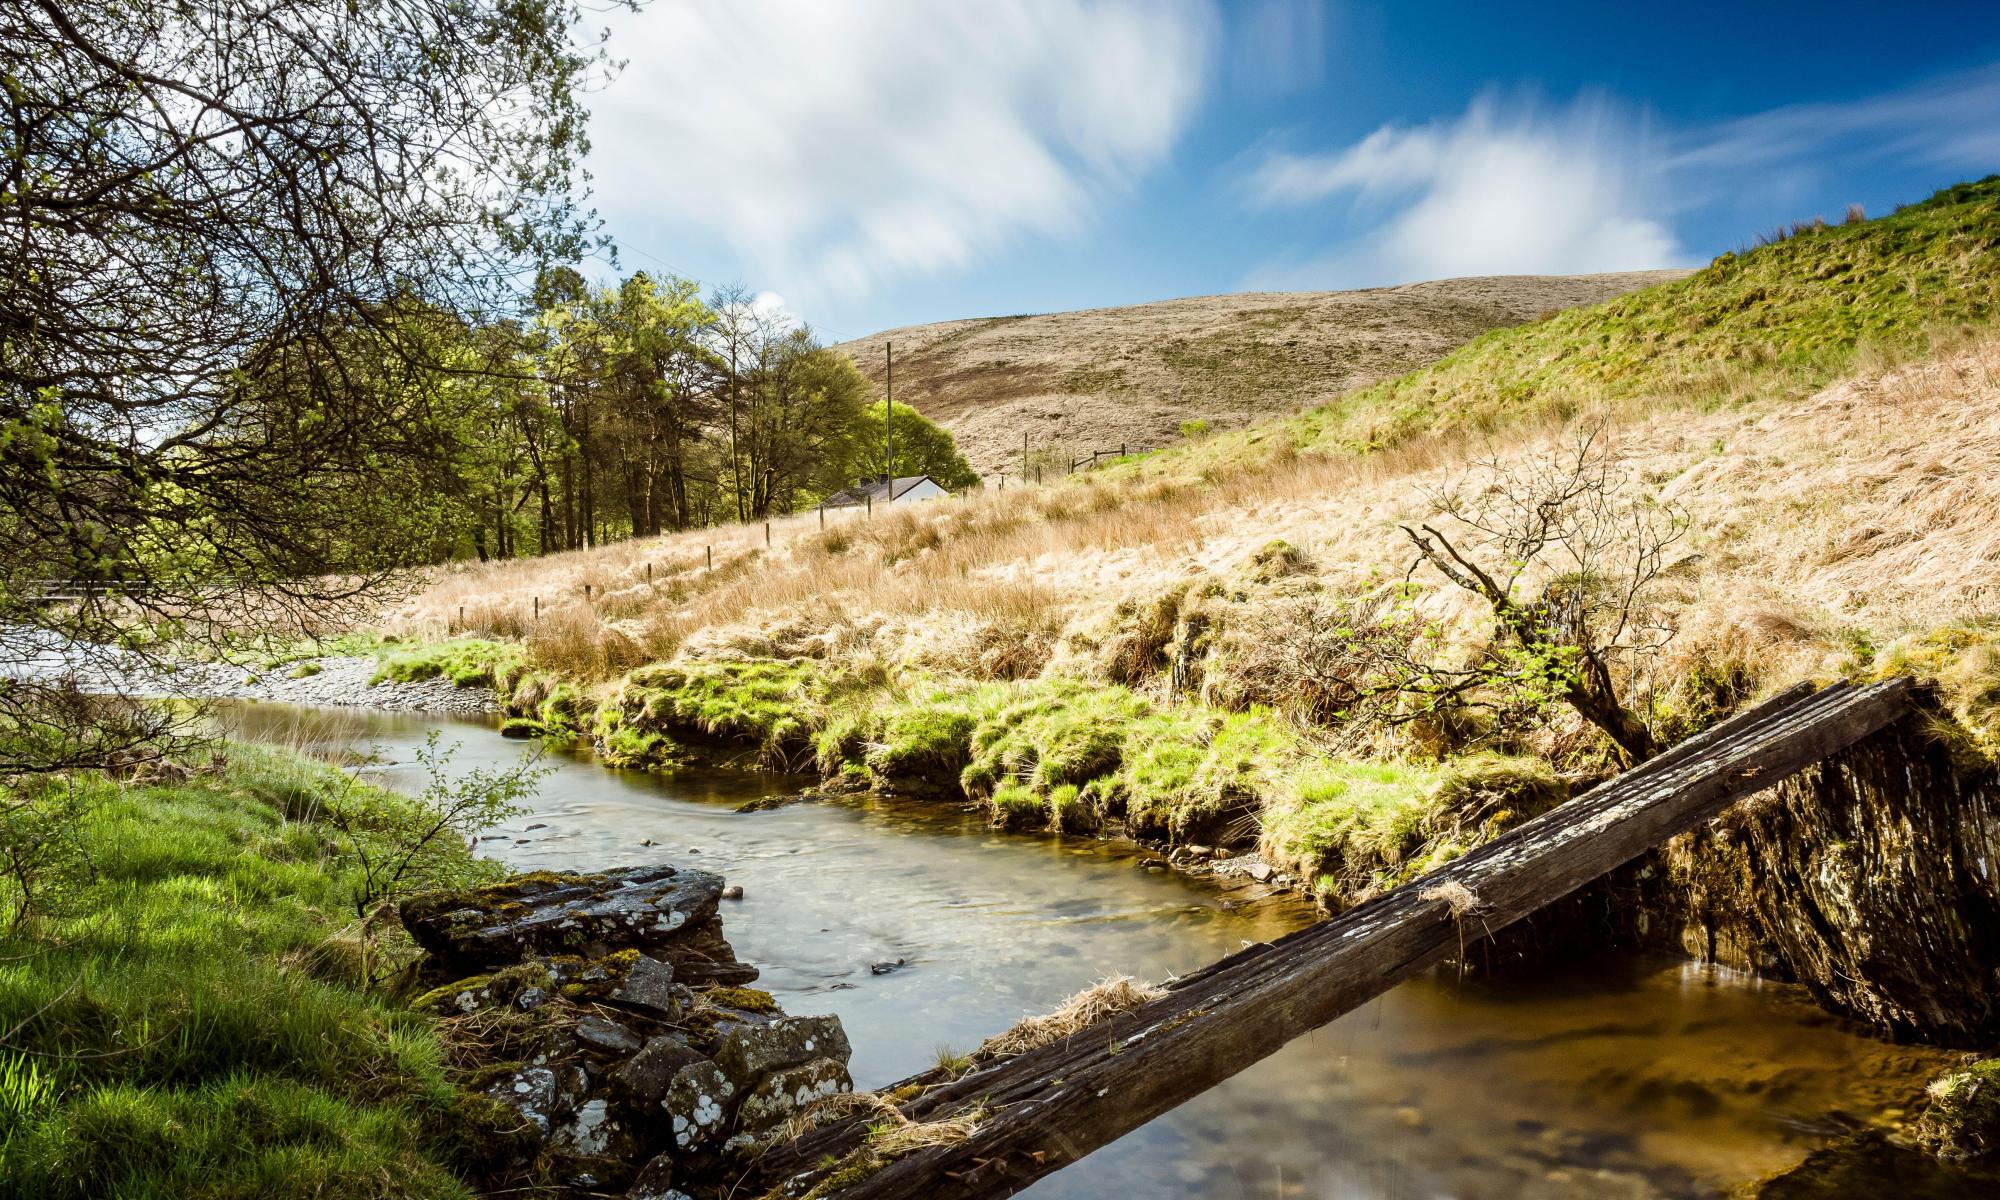 Sign our petition to protect this precious Welsh landscape | Letter